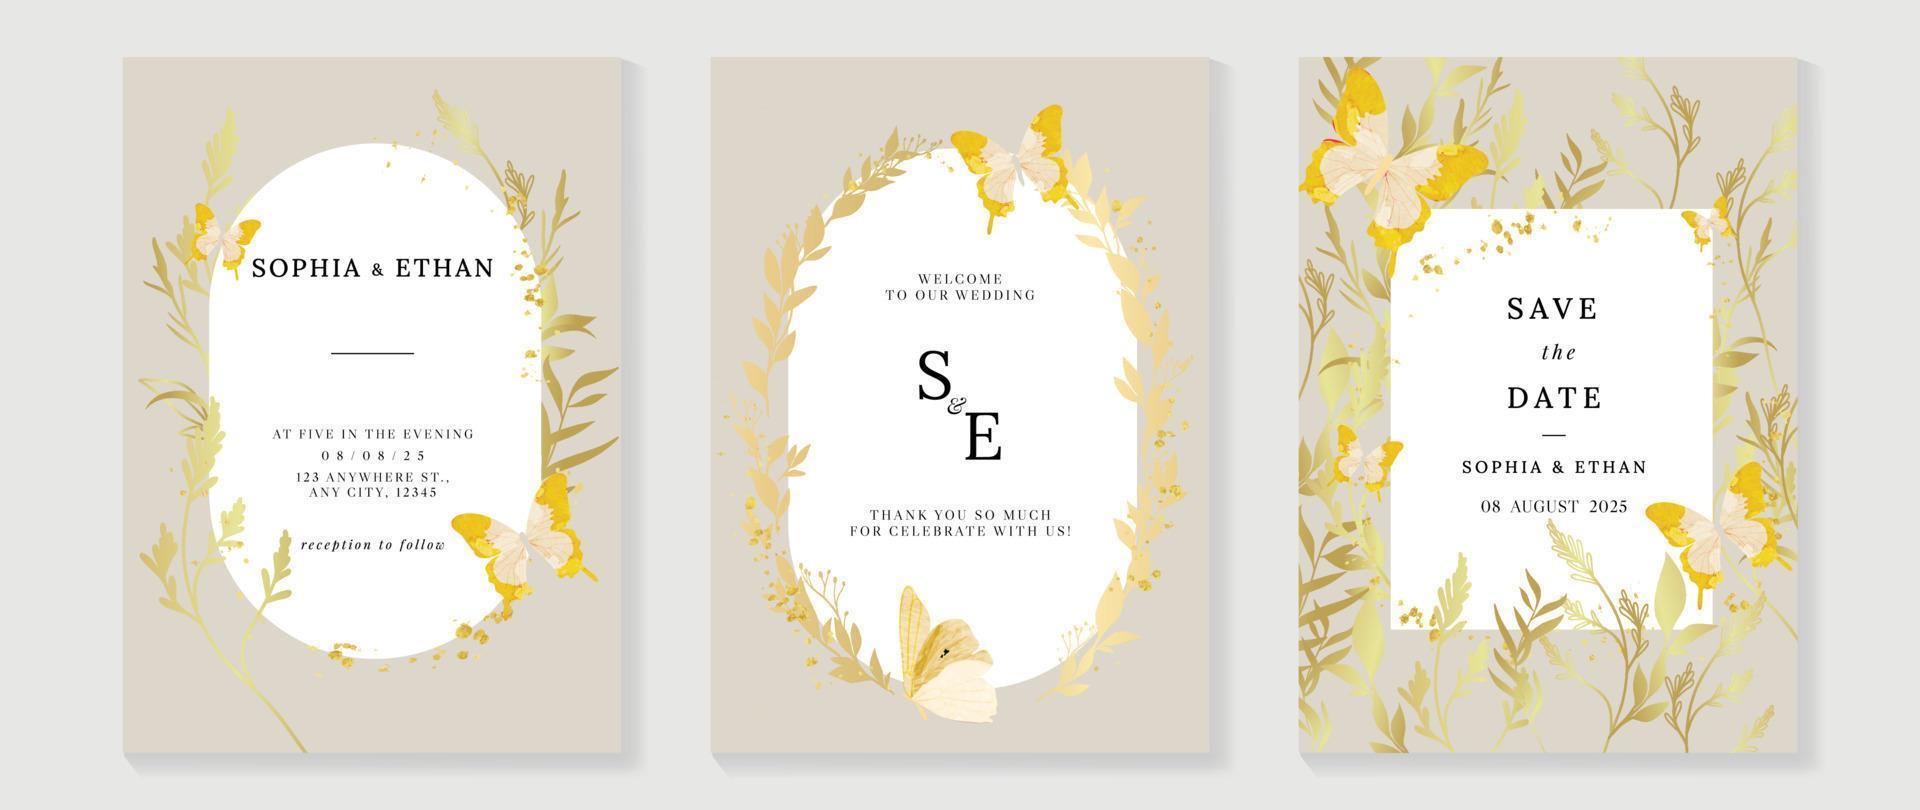 Luxury wedding invitation card background vector. Golden texture botanical leaf branch and butterfly with geometric frame template. Design illustration for wedding and vip cover template, banner. vector